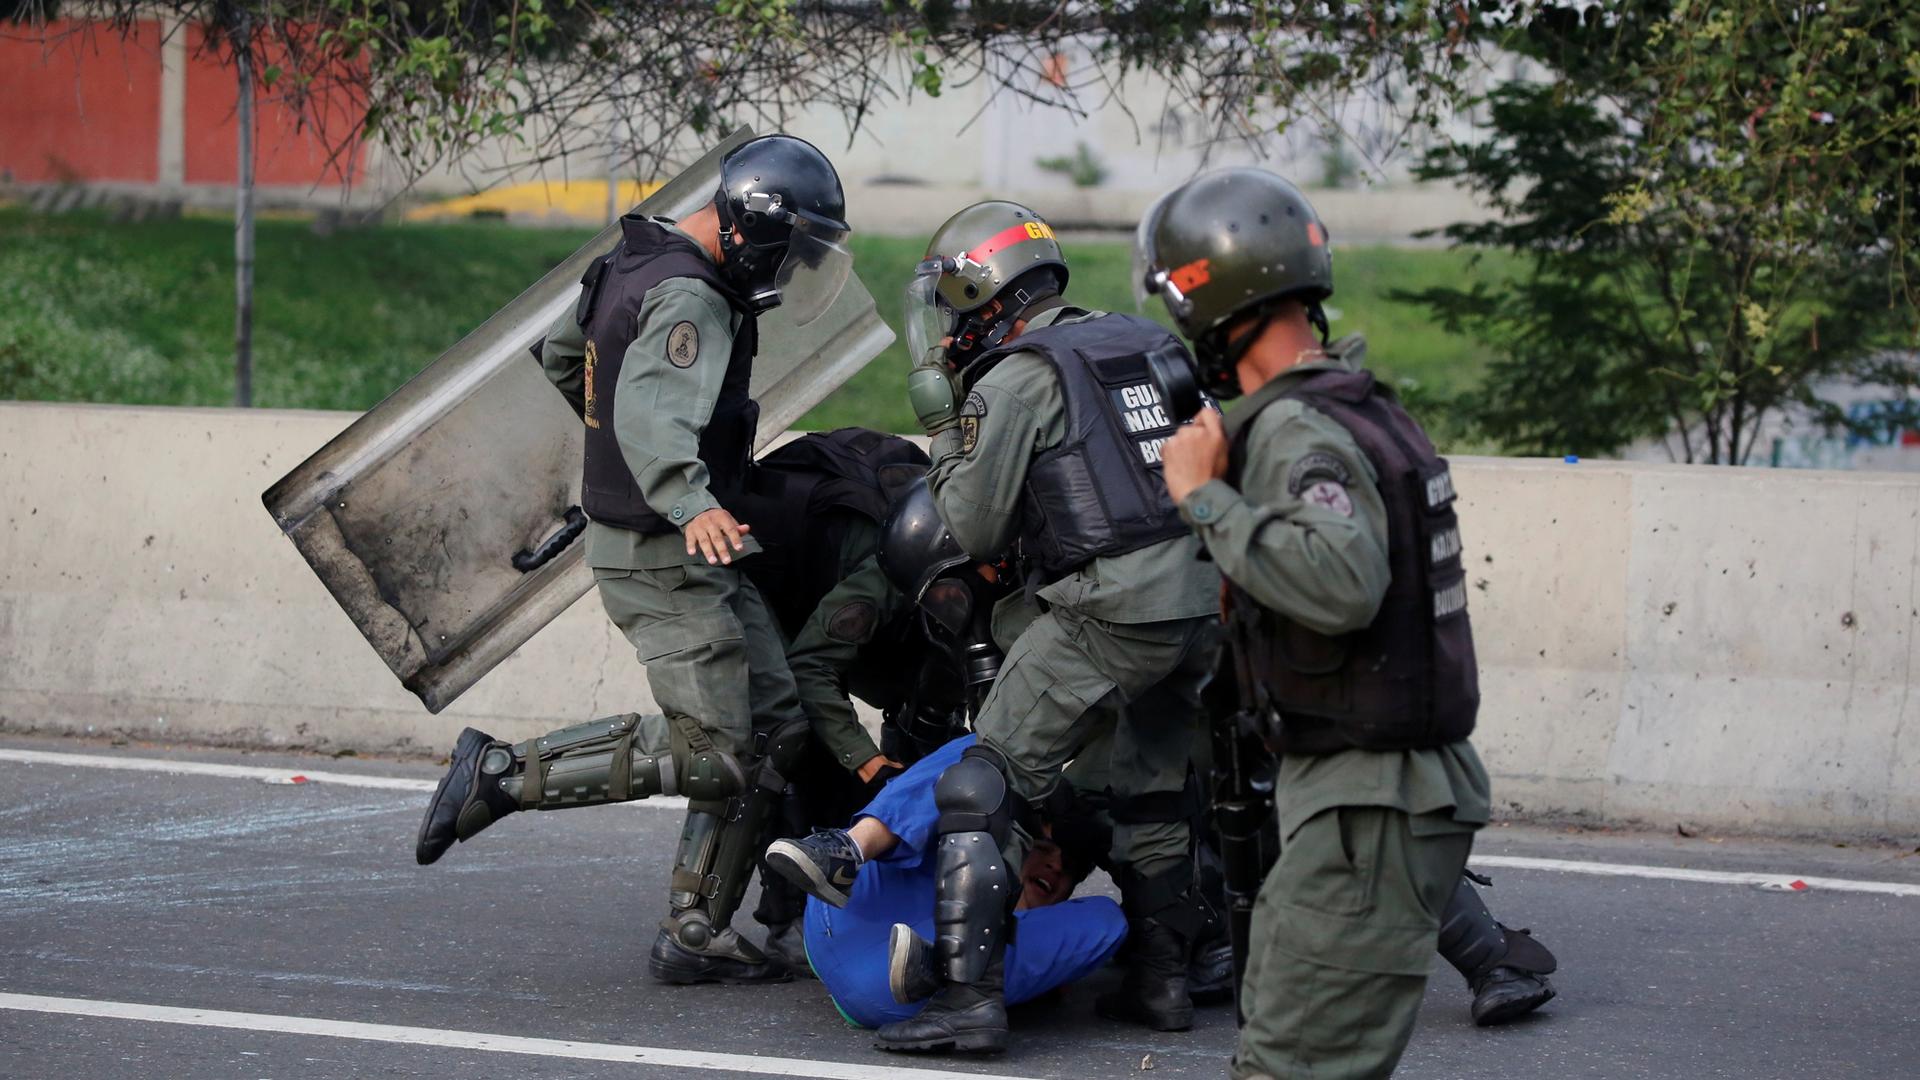 An opposition supporter is detained by riot police during a rally against President Nicolas Maduro in Caracas, Venezuela.